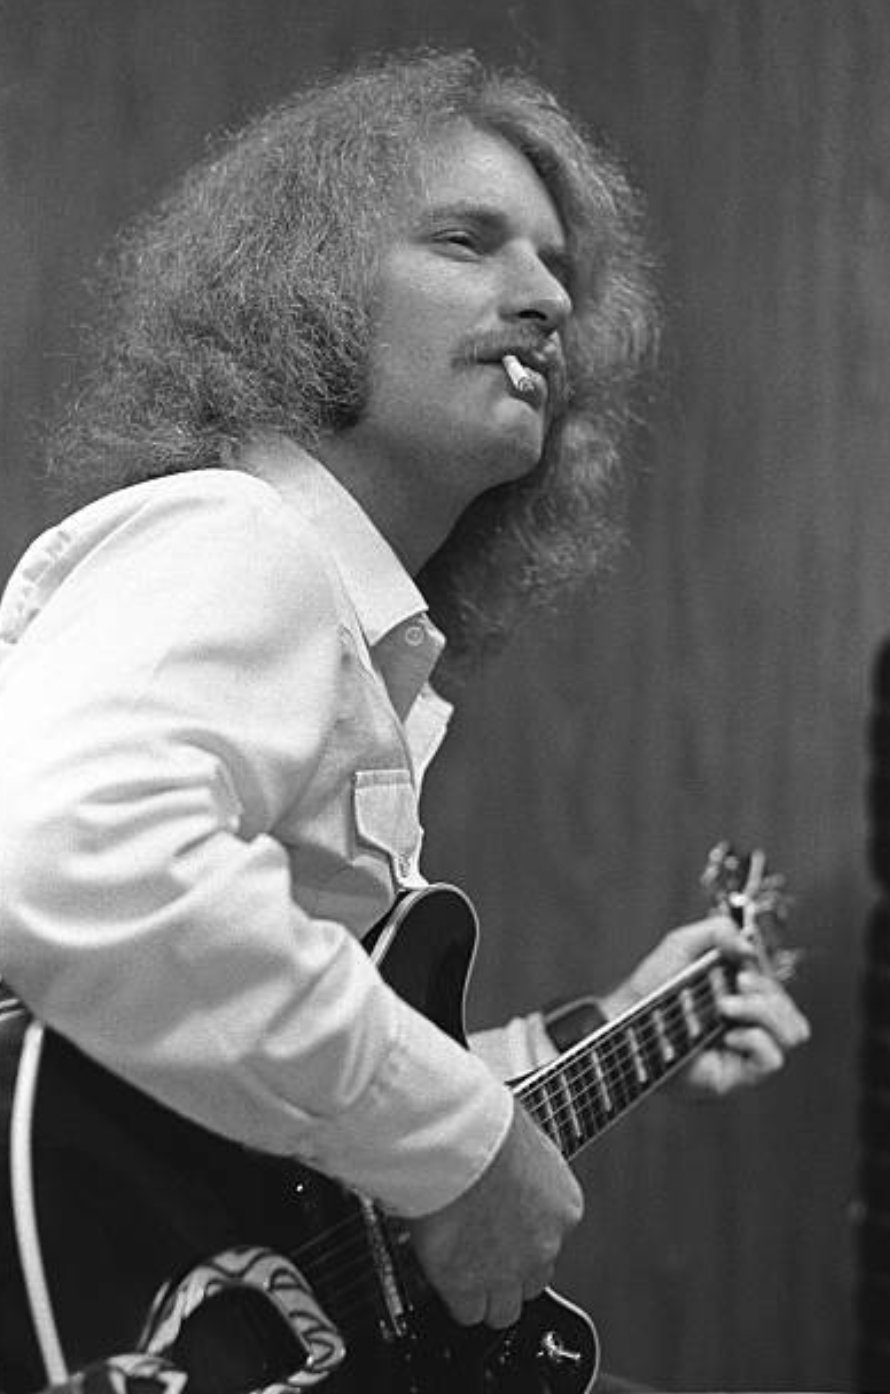 Happy birthday to Tom Fogerty of Missing you today! : Baron Wolman 